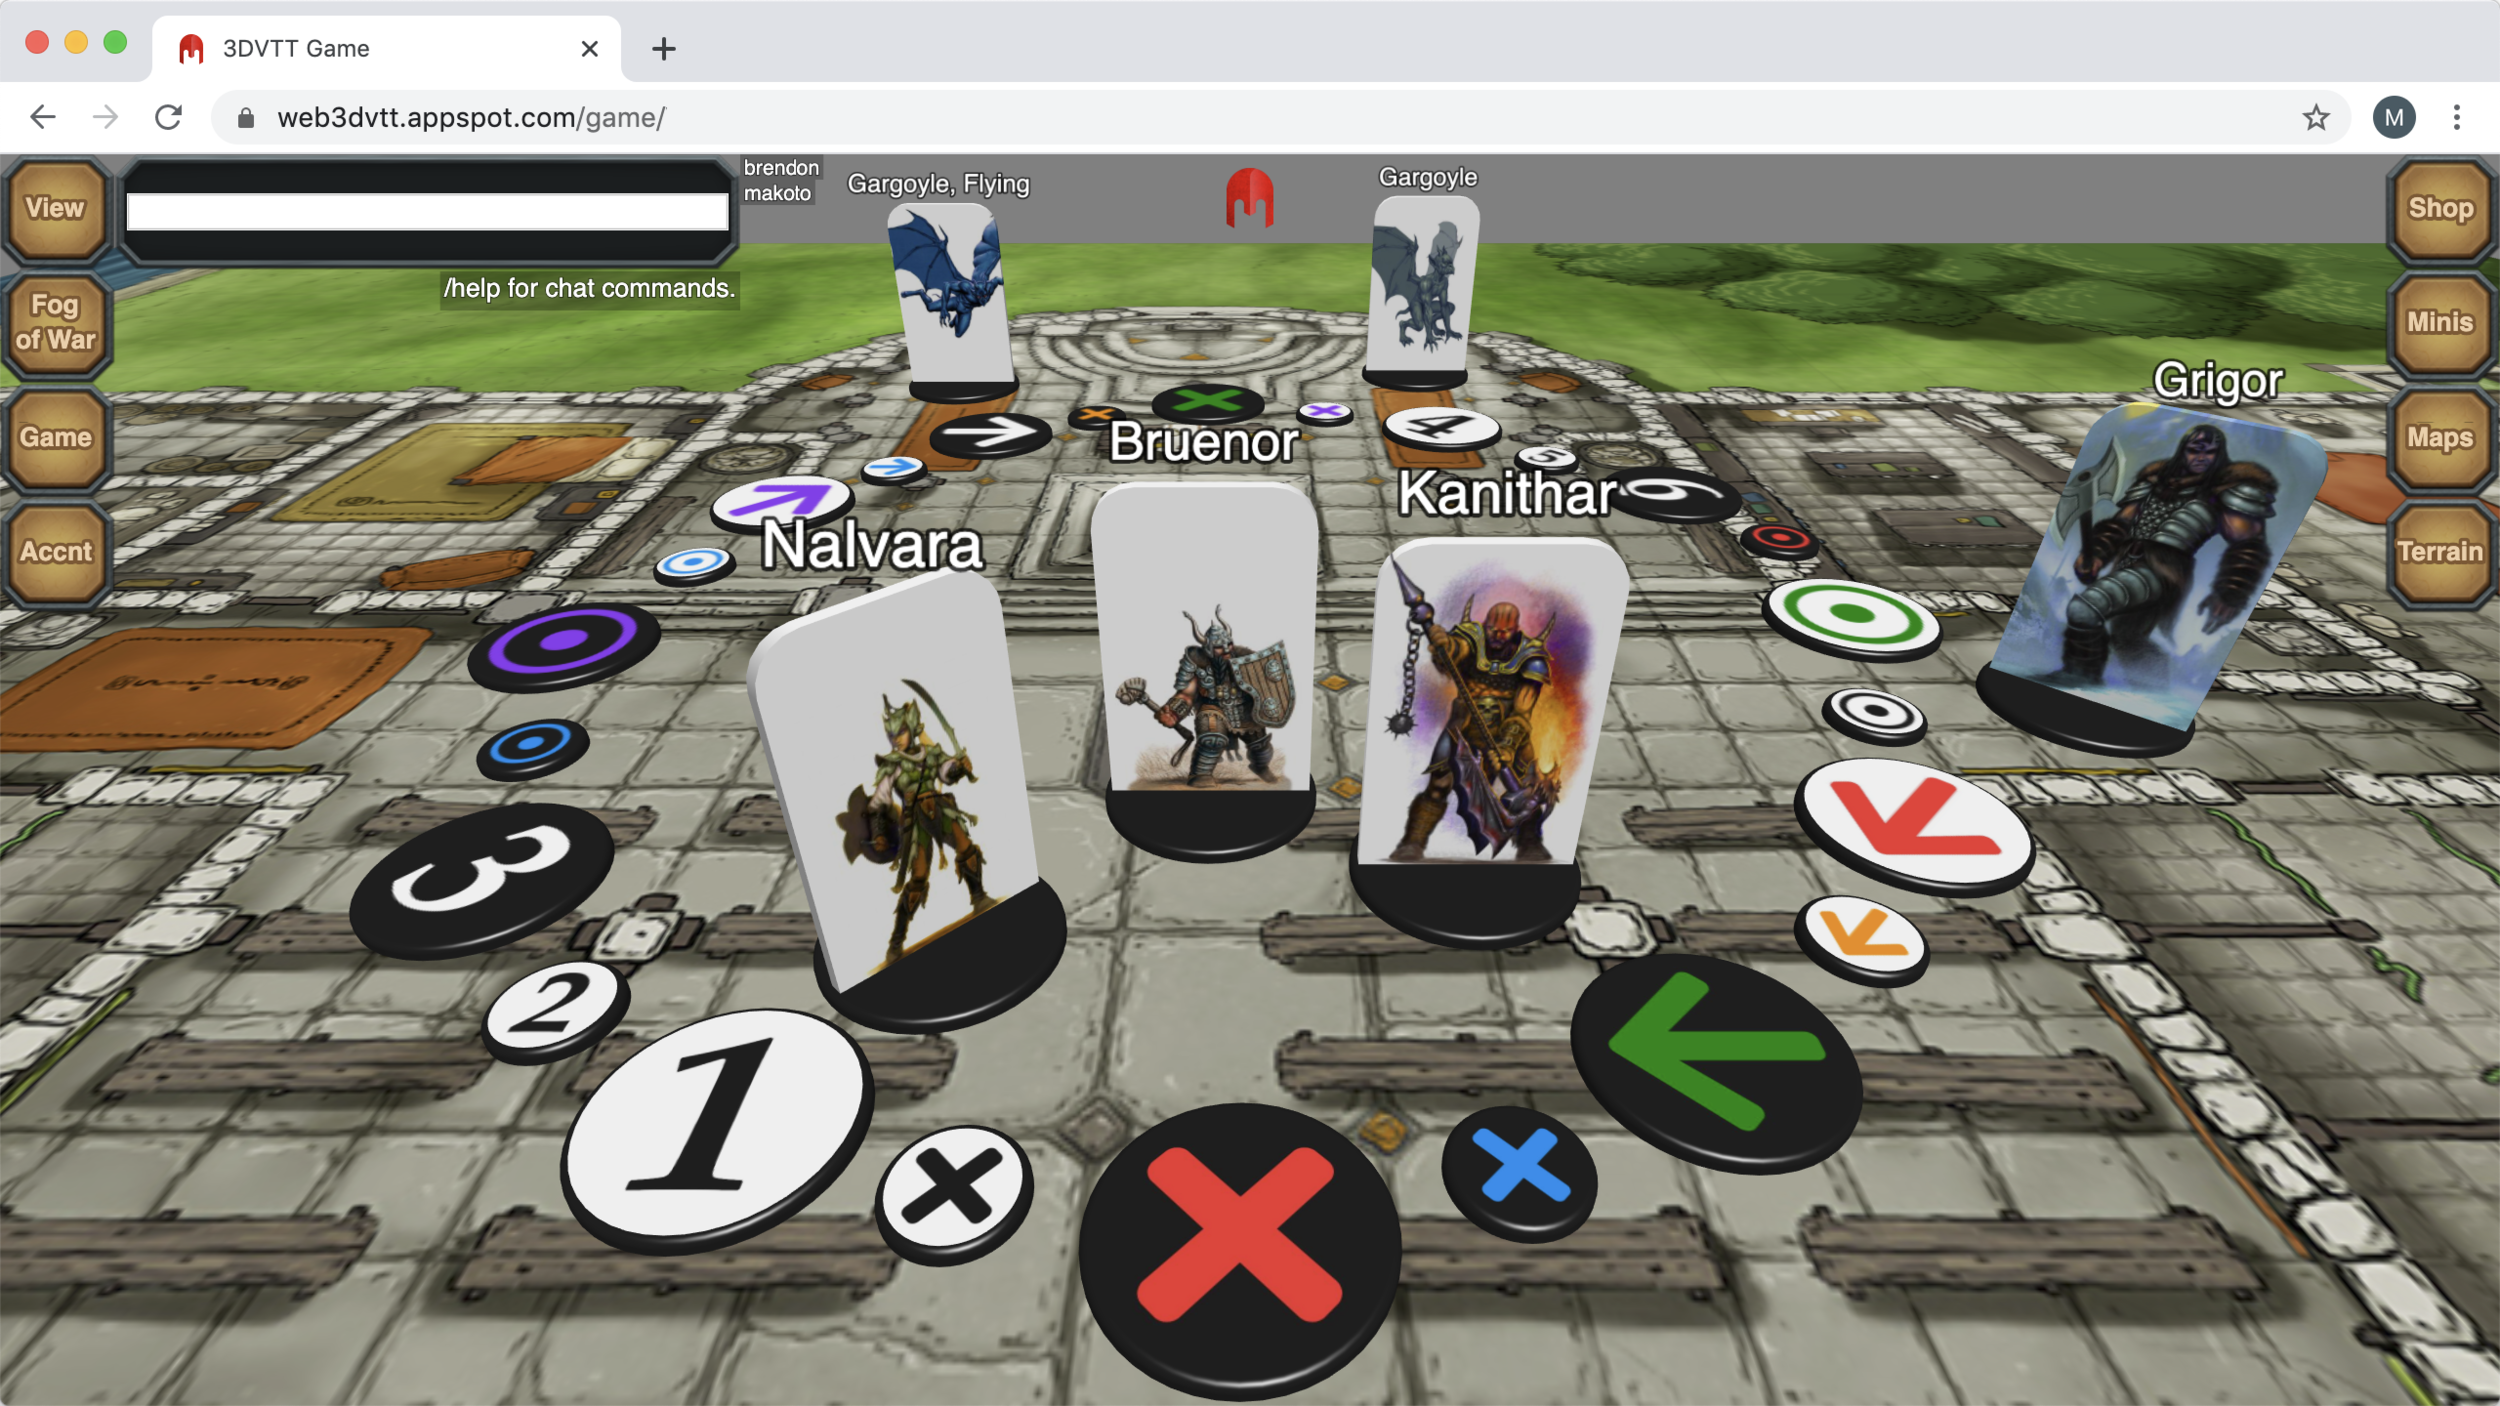 GitHub - studiobram/Virtual-tabletop: Virtual tabletop is an online  application that you can use to create and play board games using a browser.